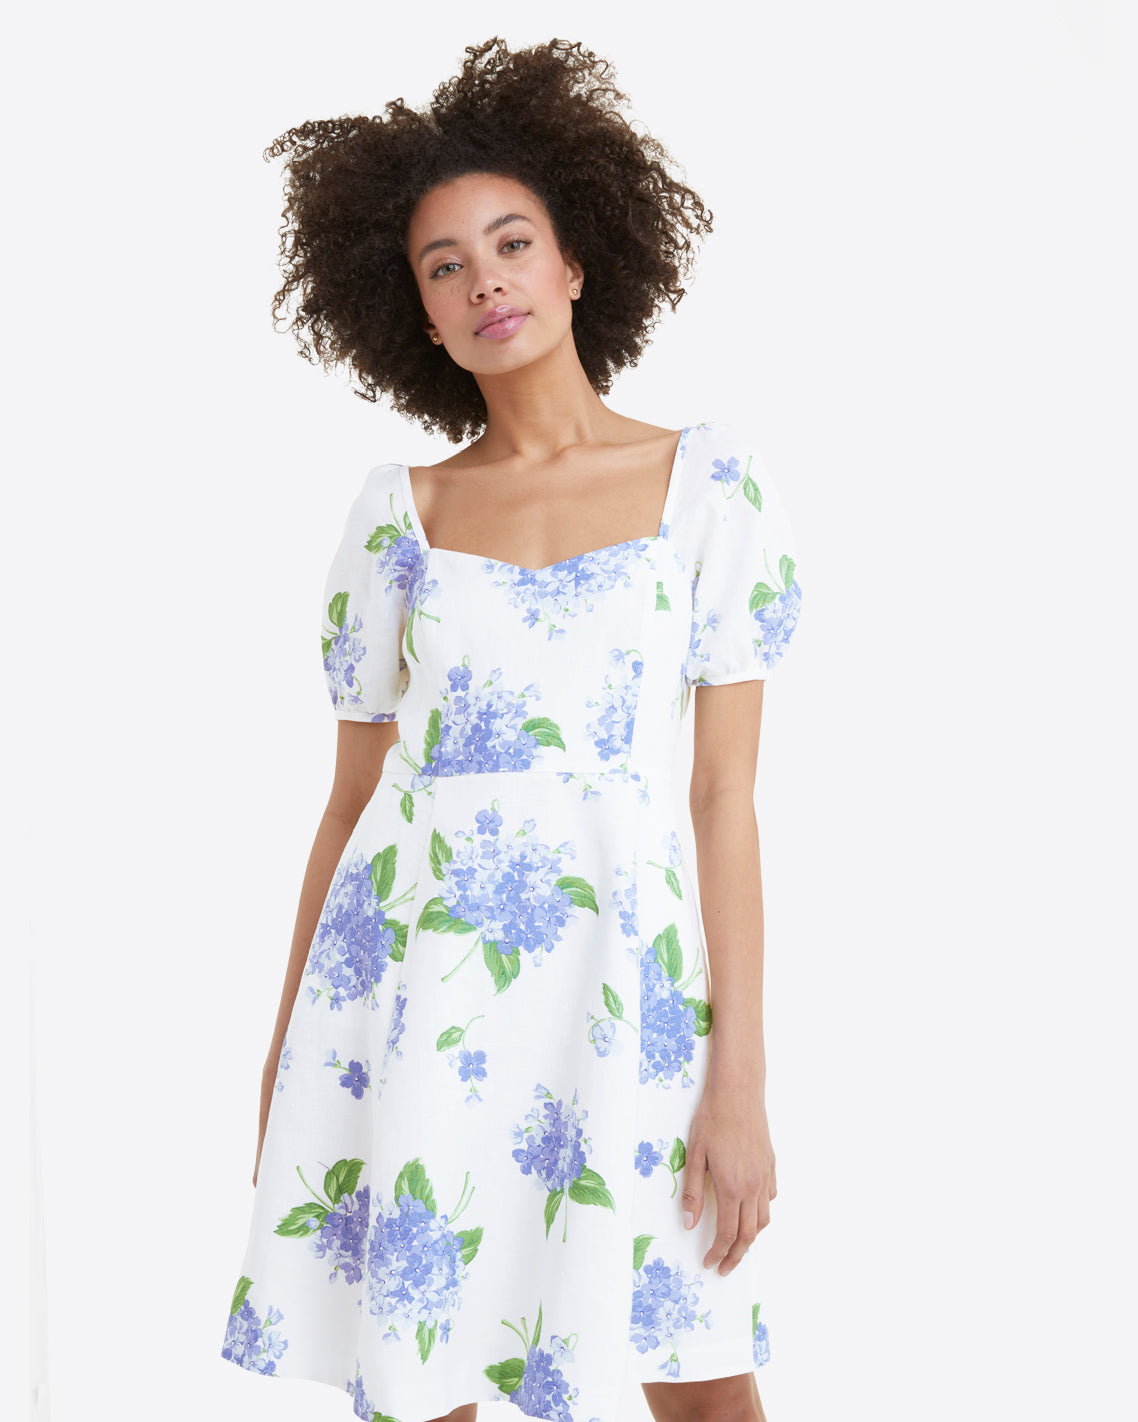 My Favorite Floral Spring Dresses… – The Blue Hydrangeas – A